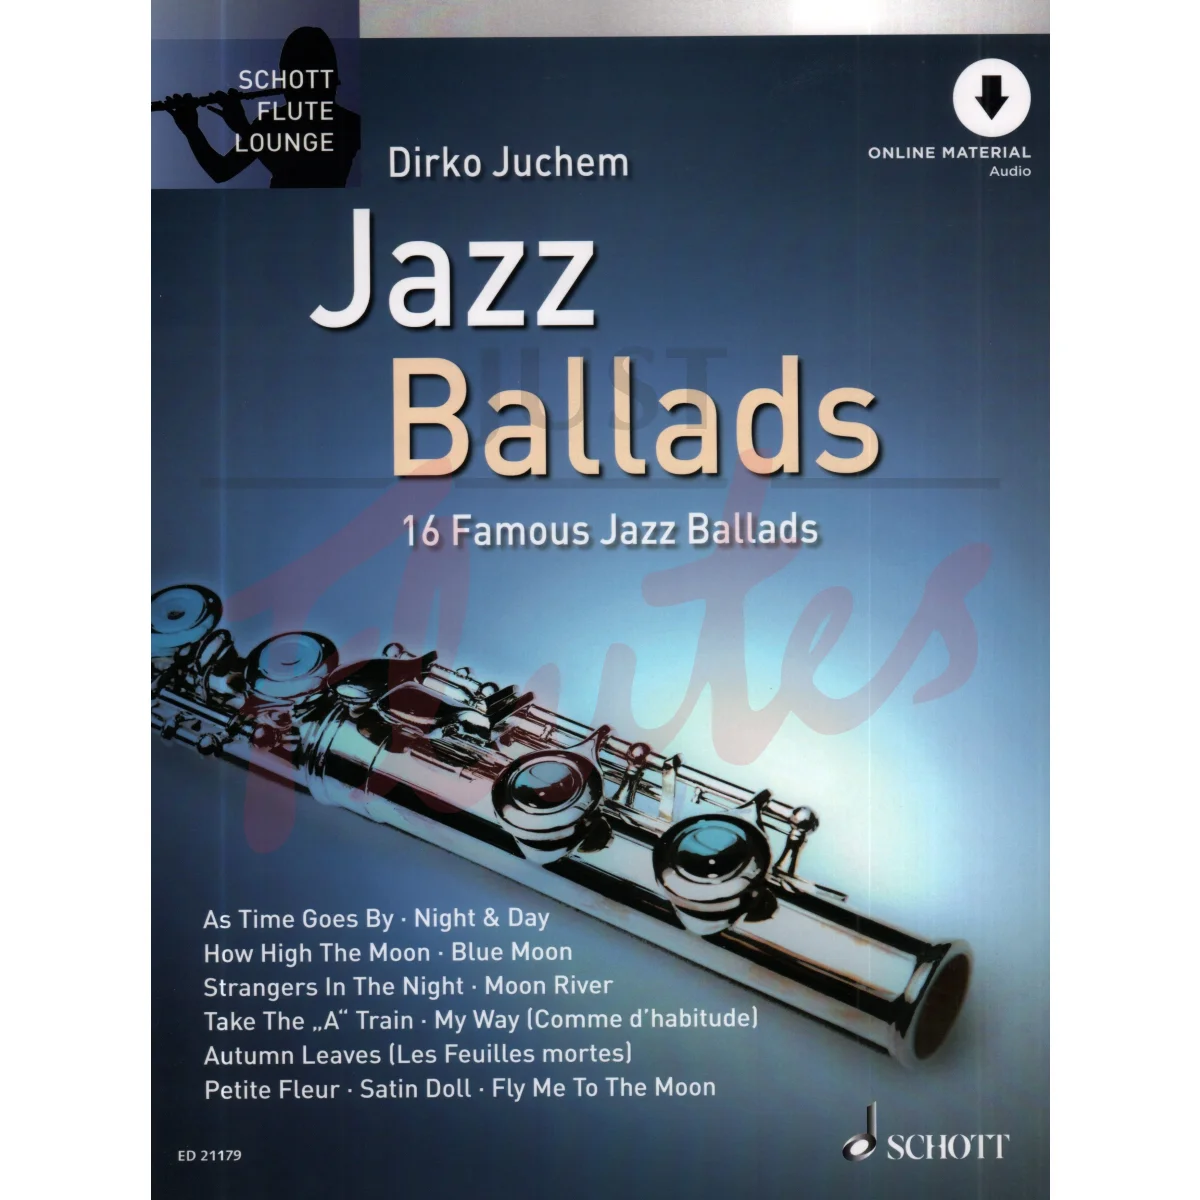 Schott Flute Lounge: Jazz Ballads for Flute and Piano